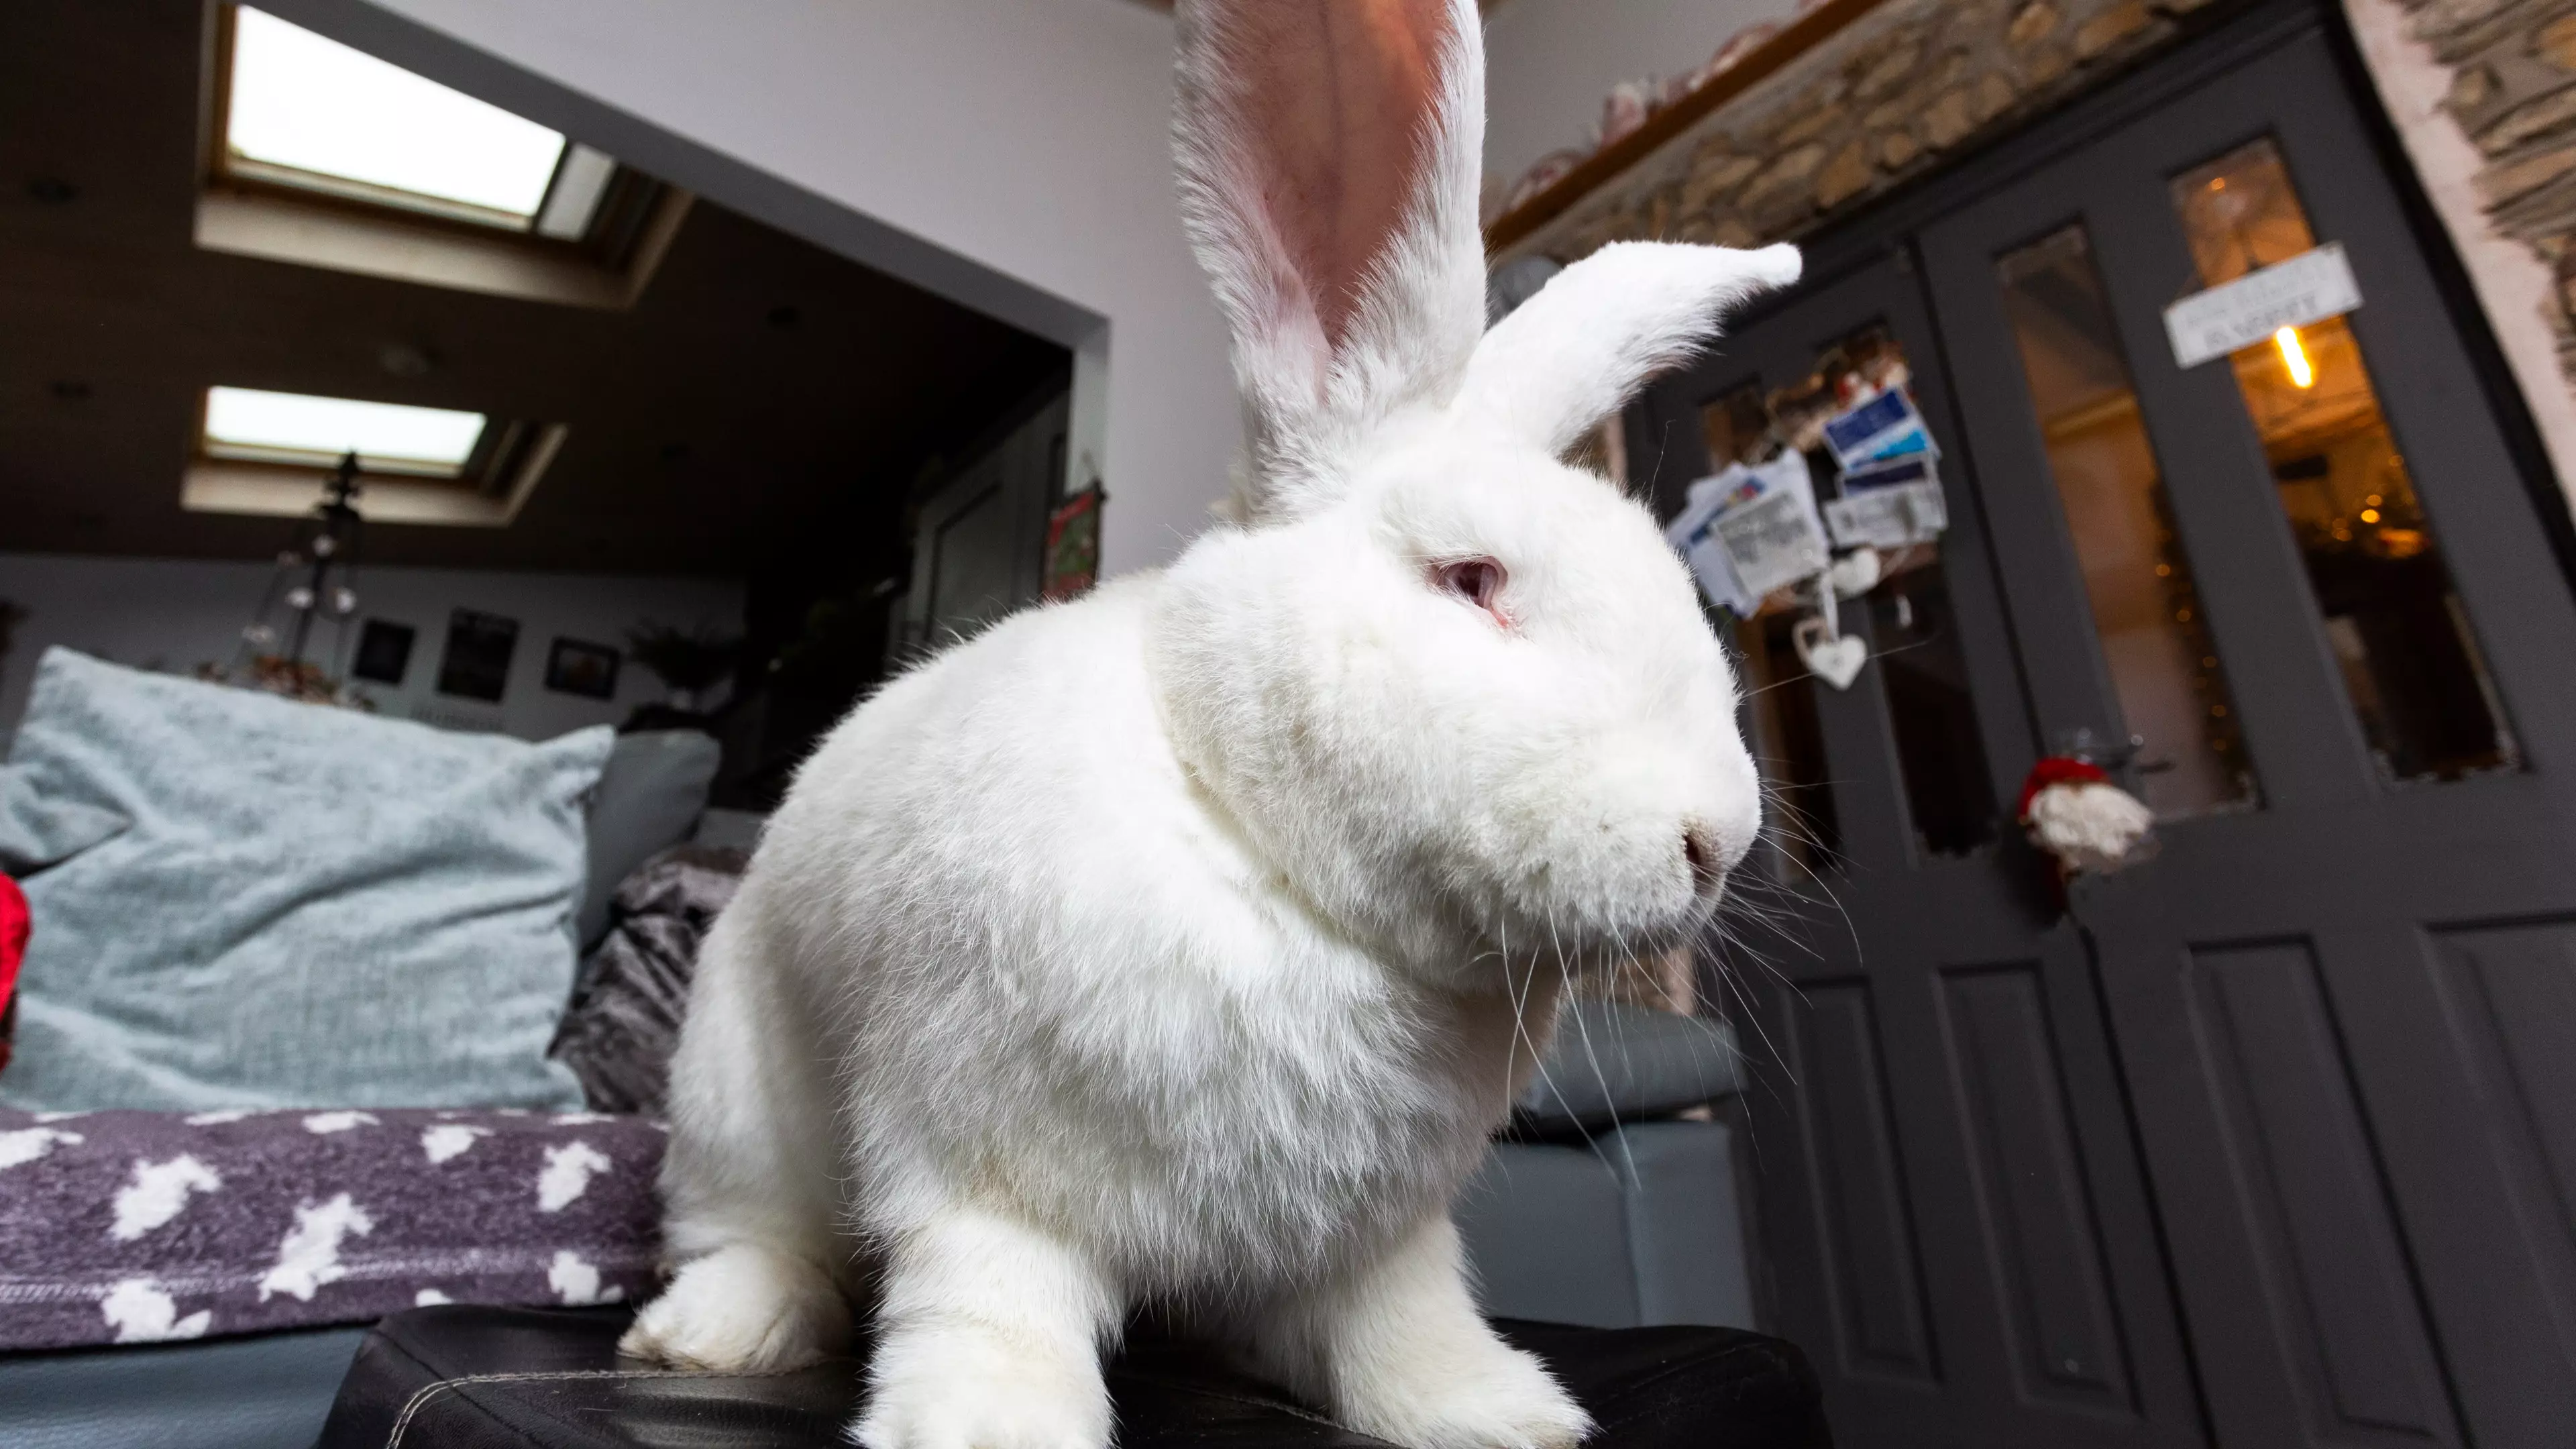 Giant Rabbit Has Its Own Bedroom And Is Pursuing Modelling Career